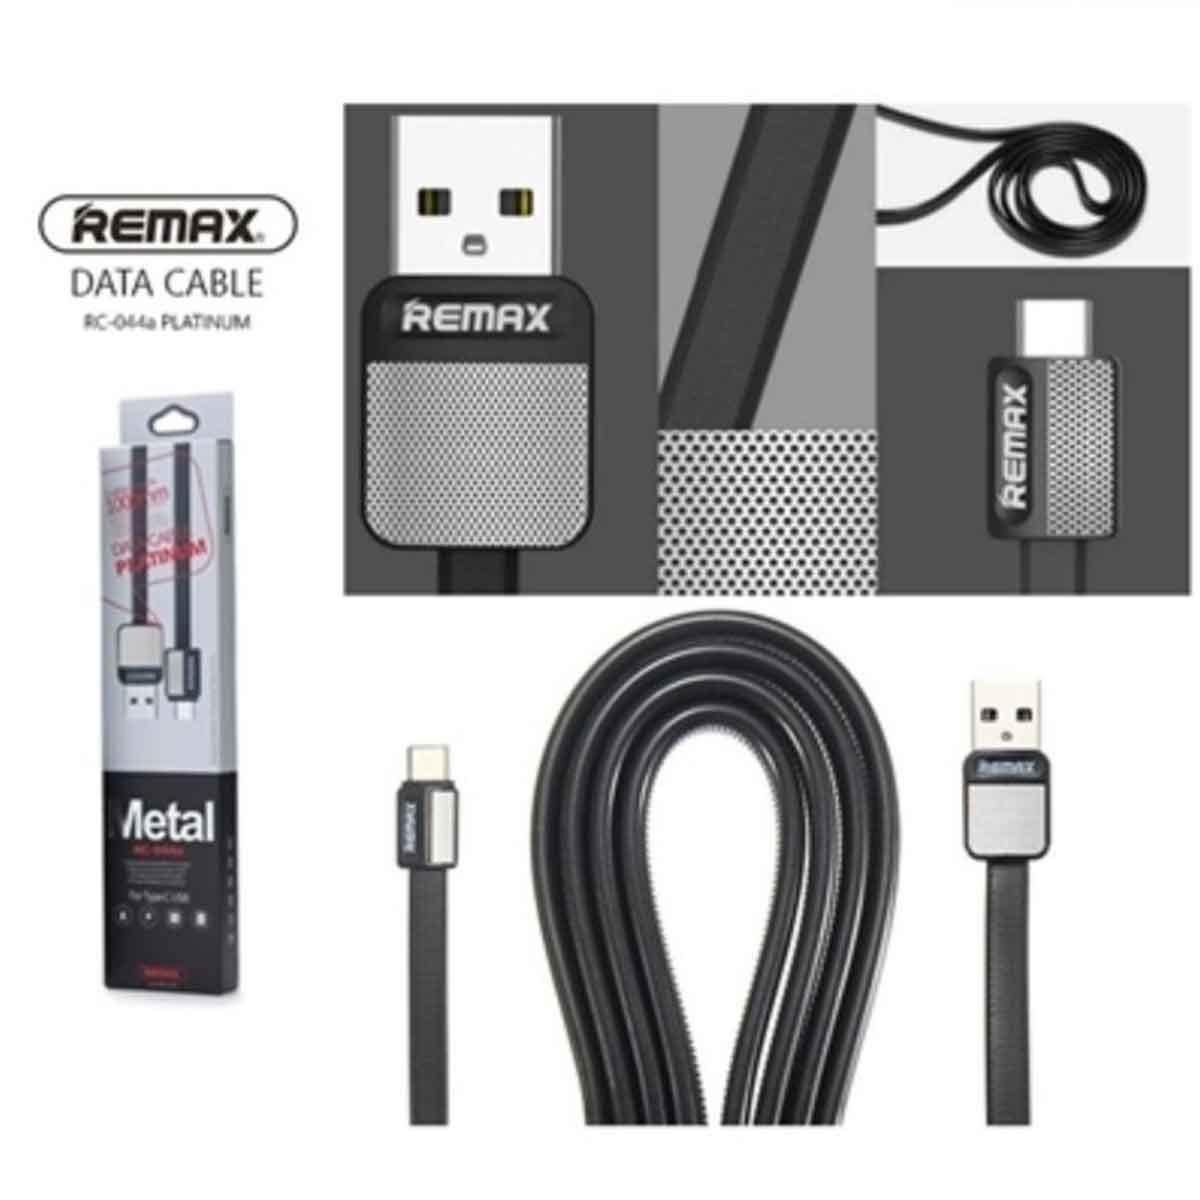 Remax Metal Data Cable